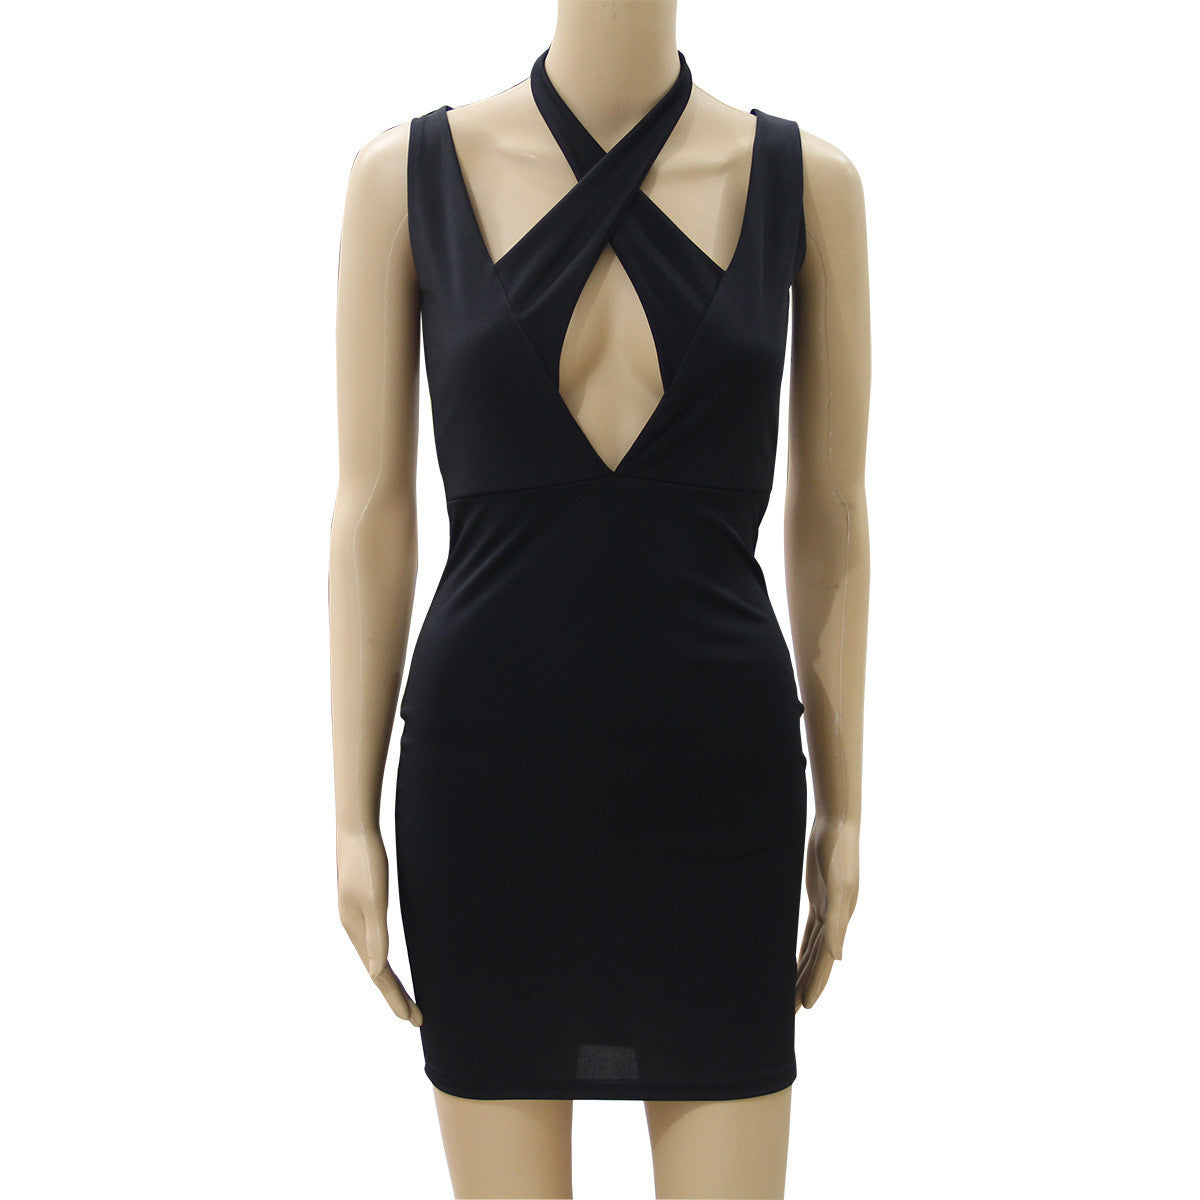 Sexy Cross Black Short Backless Bodycon Dress - Oh Yours Fashion - 7